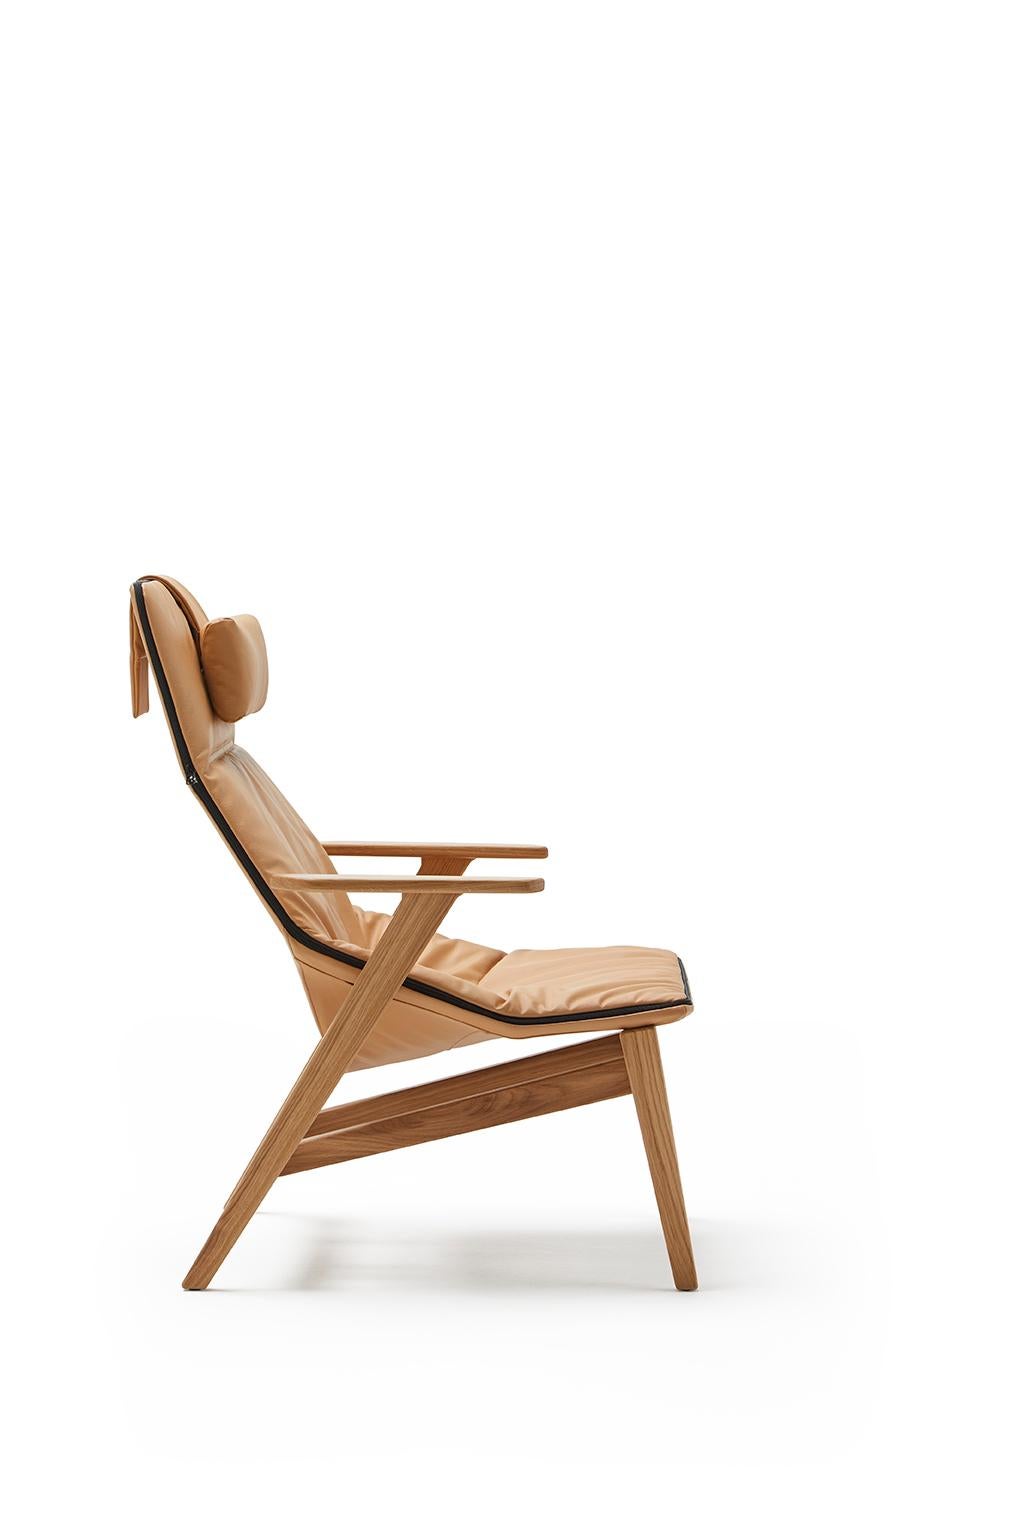 viccarbe ace chair